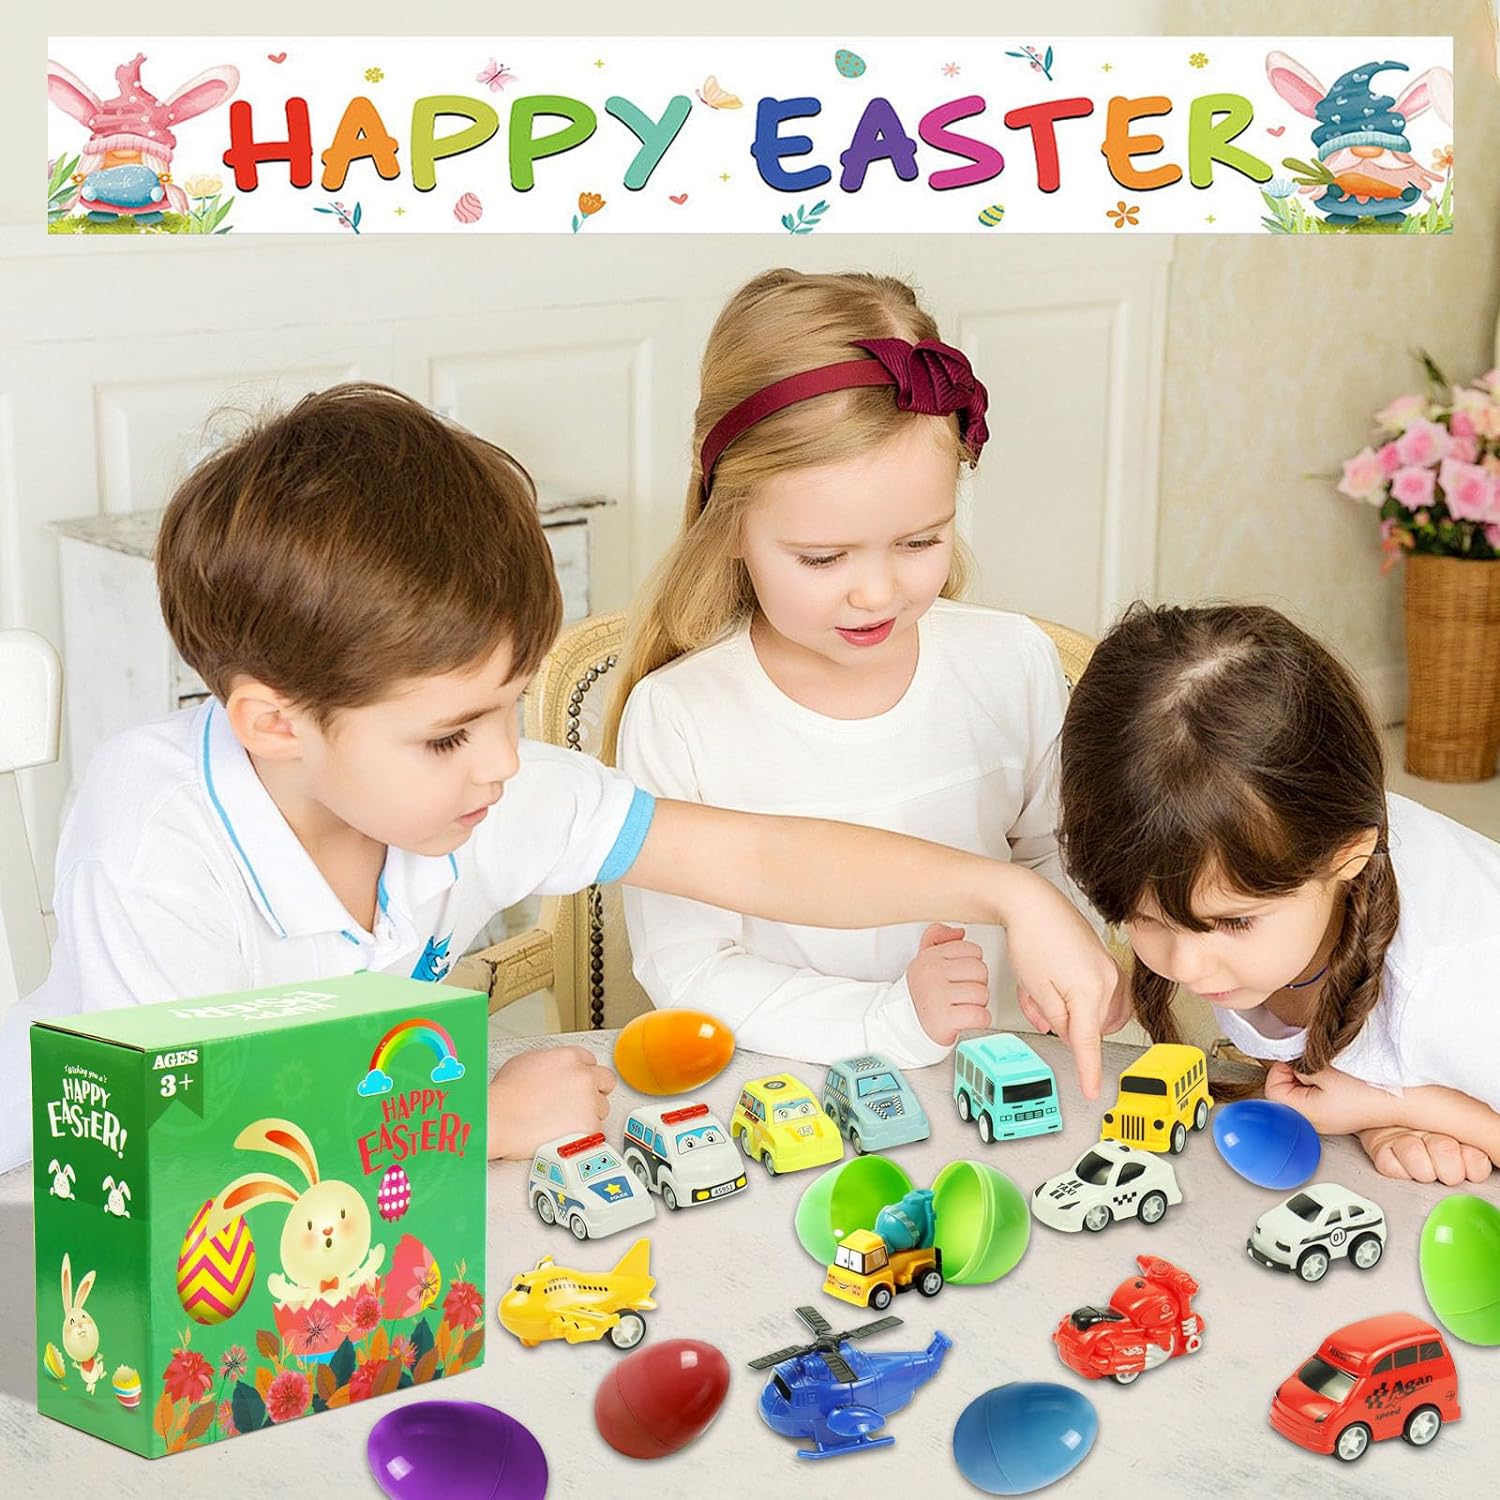 Easter Eggs with Toys Inside, 24Pcs Colorful Plastic Easter Eggs Filled with Toy Vehicles for Kids Cykapu